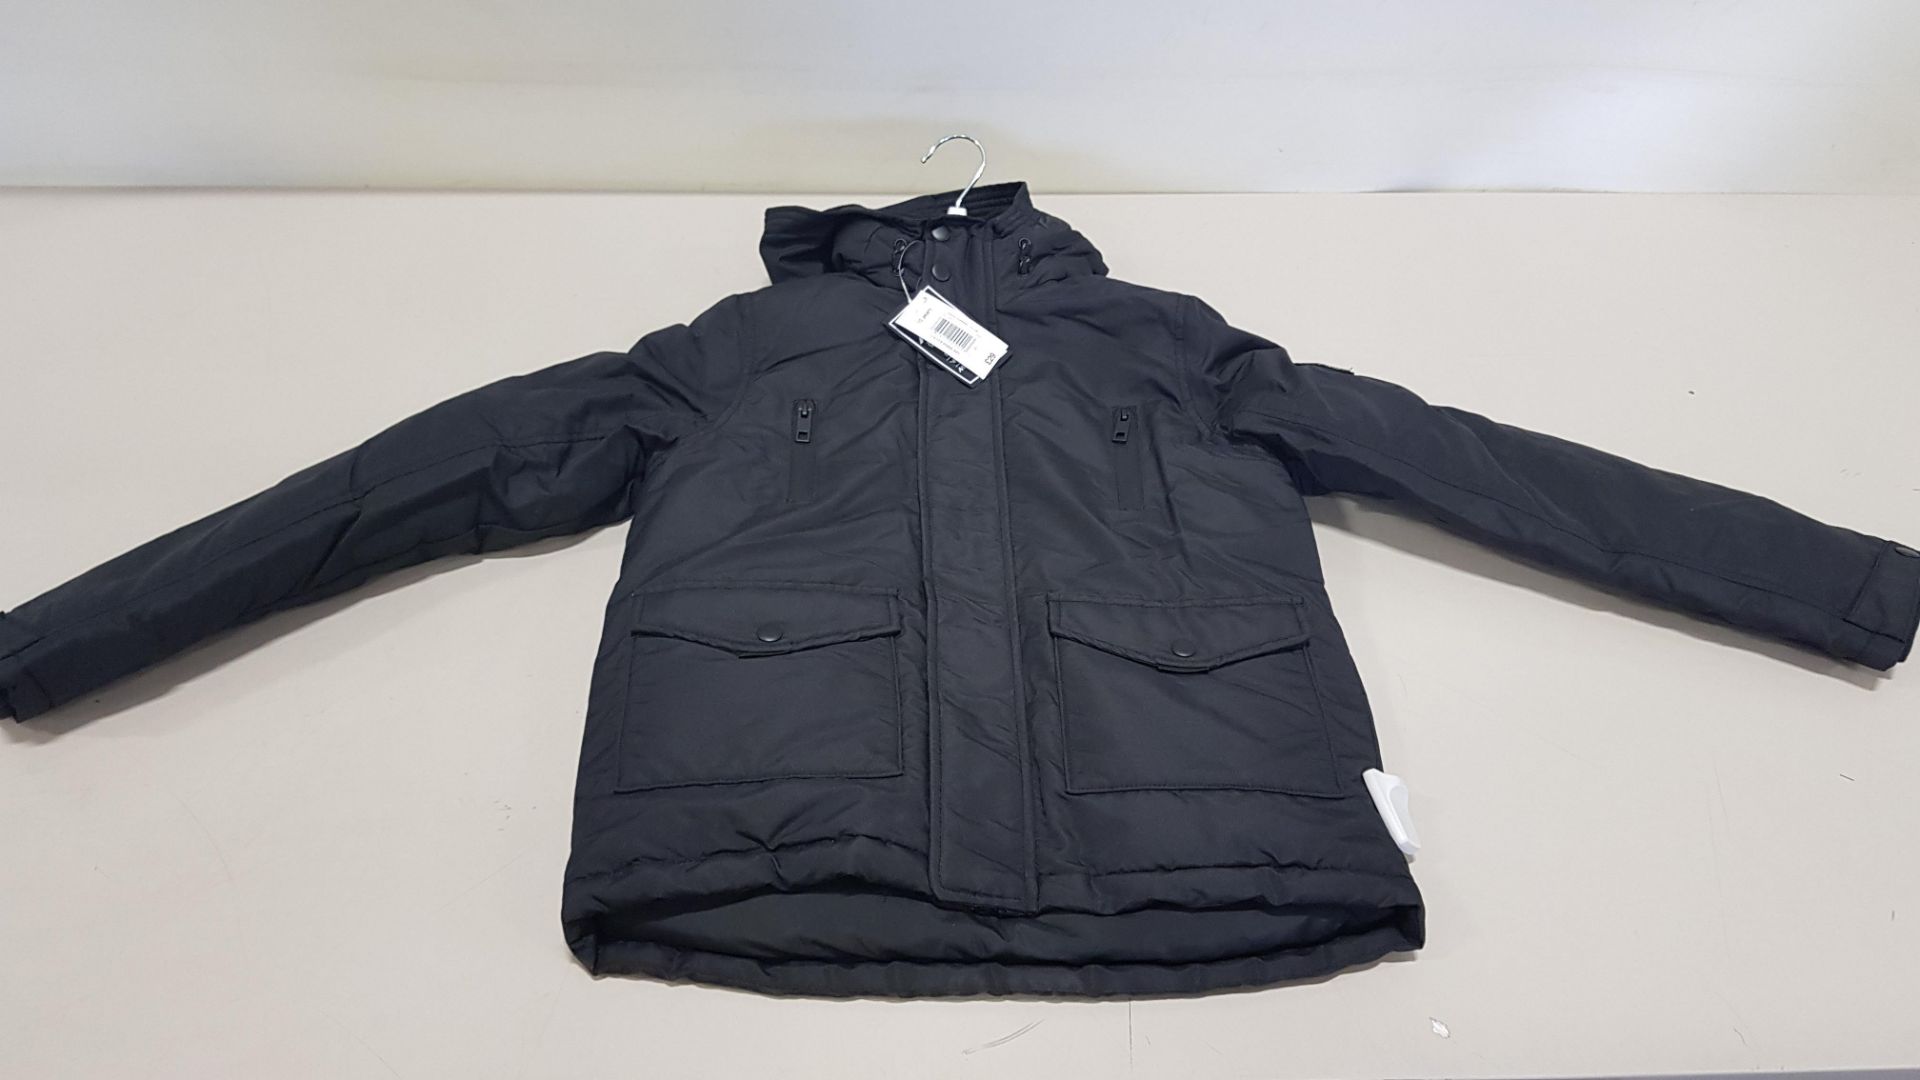 10 X BRAND NEW OUTERWEAR KIDS TECHNICAL PARKA IN SIZES 10, 11, 12 AND 13 YEARS RRP £29.00 (TOTAL RRP